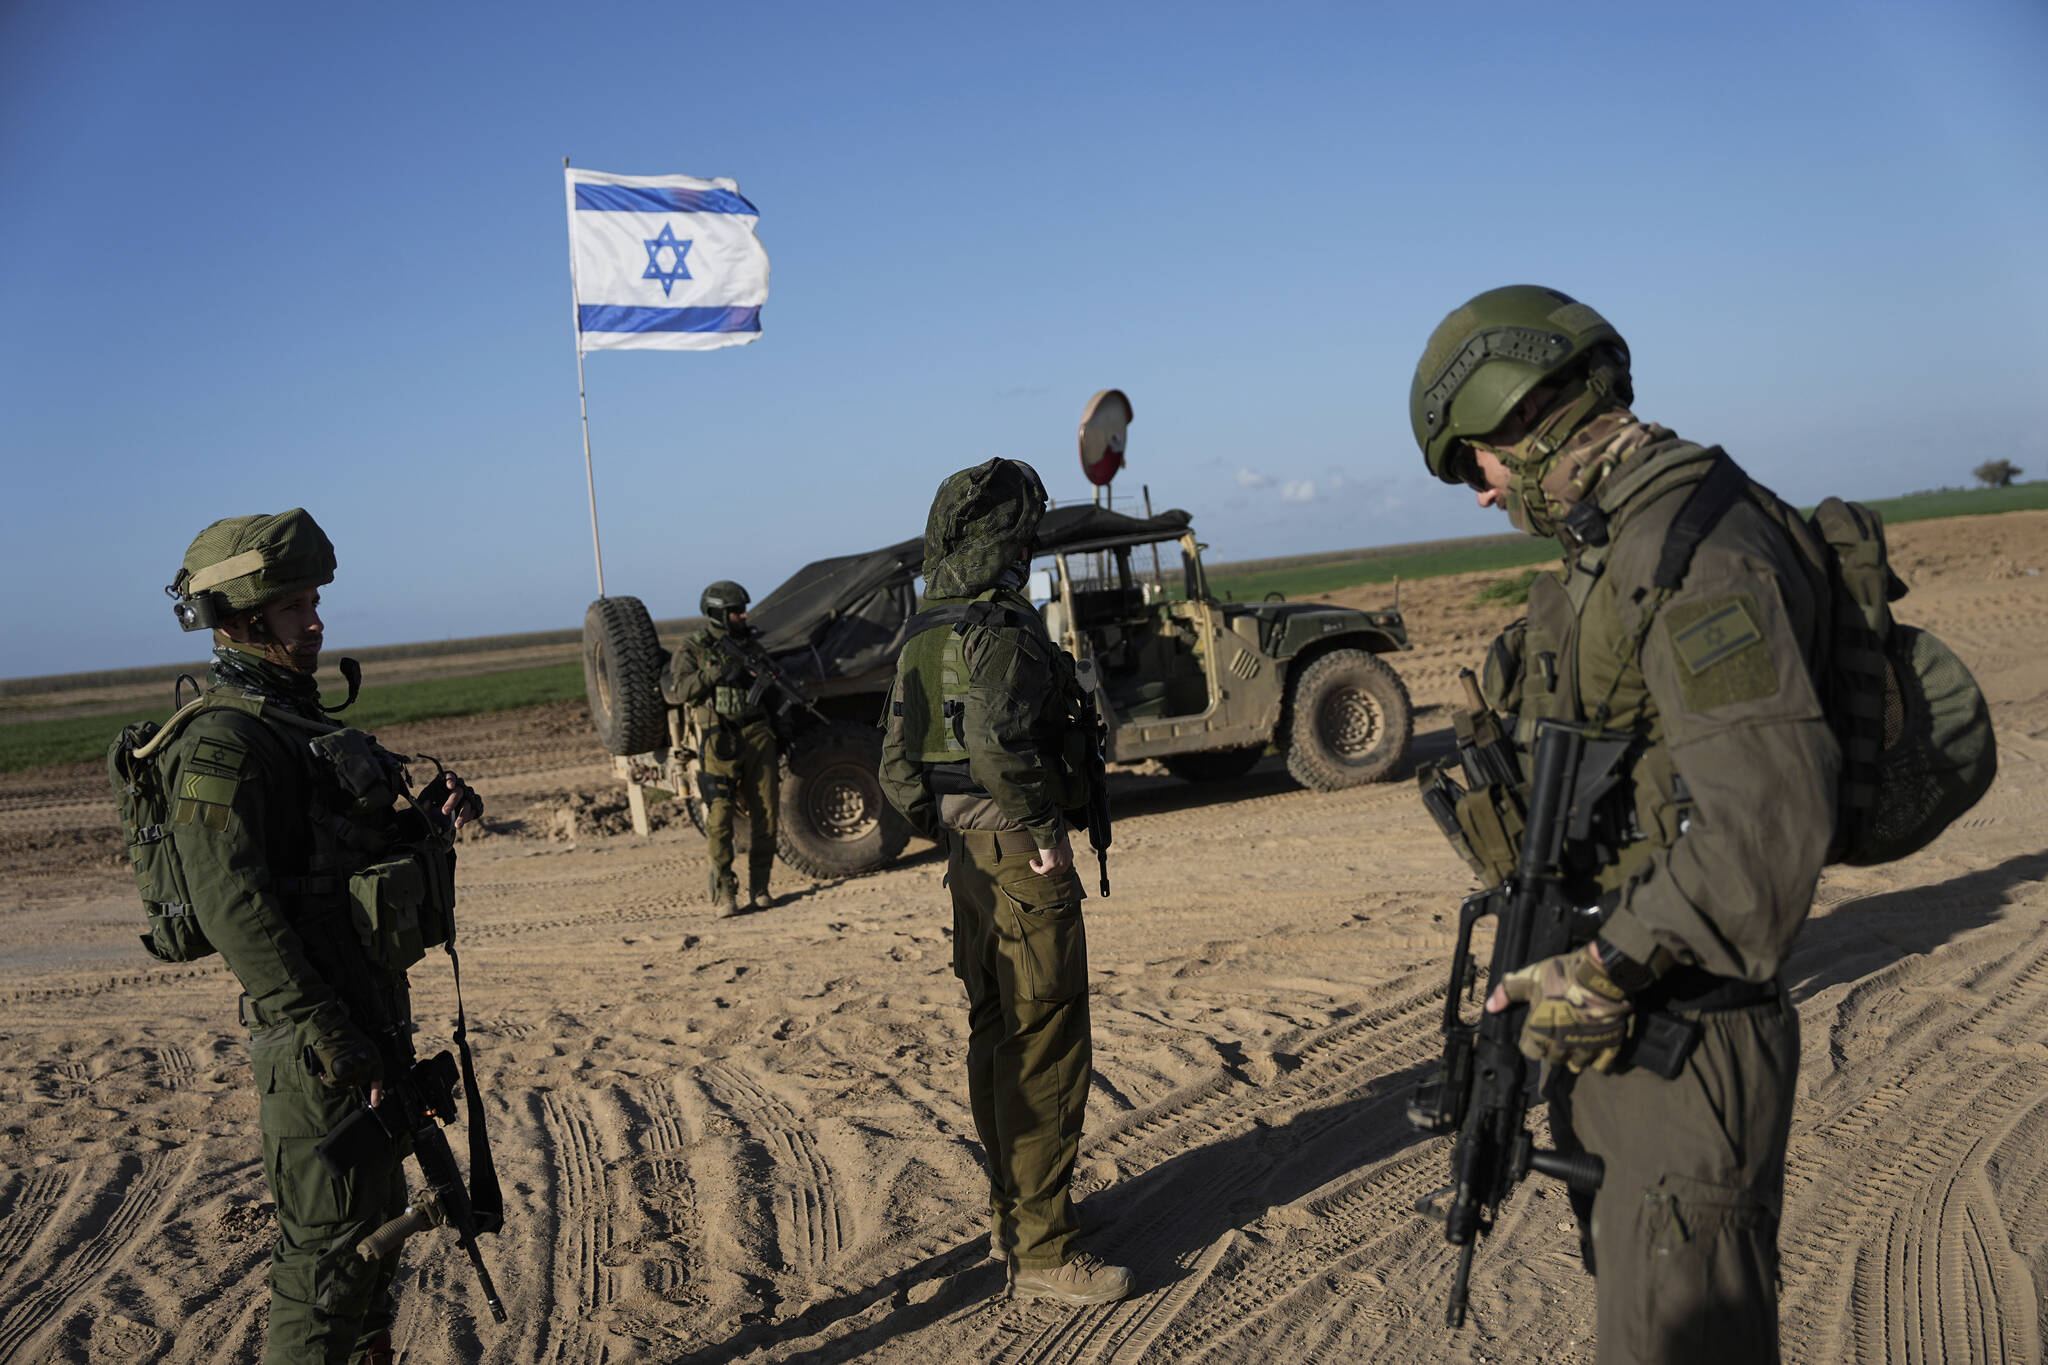 Israeli soldiers are seen near the Gaza Strip border in southern Israel on Monday. The army is battling Palestinian militants across Gaza in the war ignited by Hamas’ Oct. 7 attack into Israel. (AP Photo/Ohad Zwigenberg)